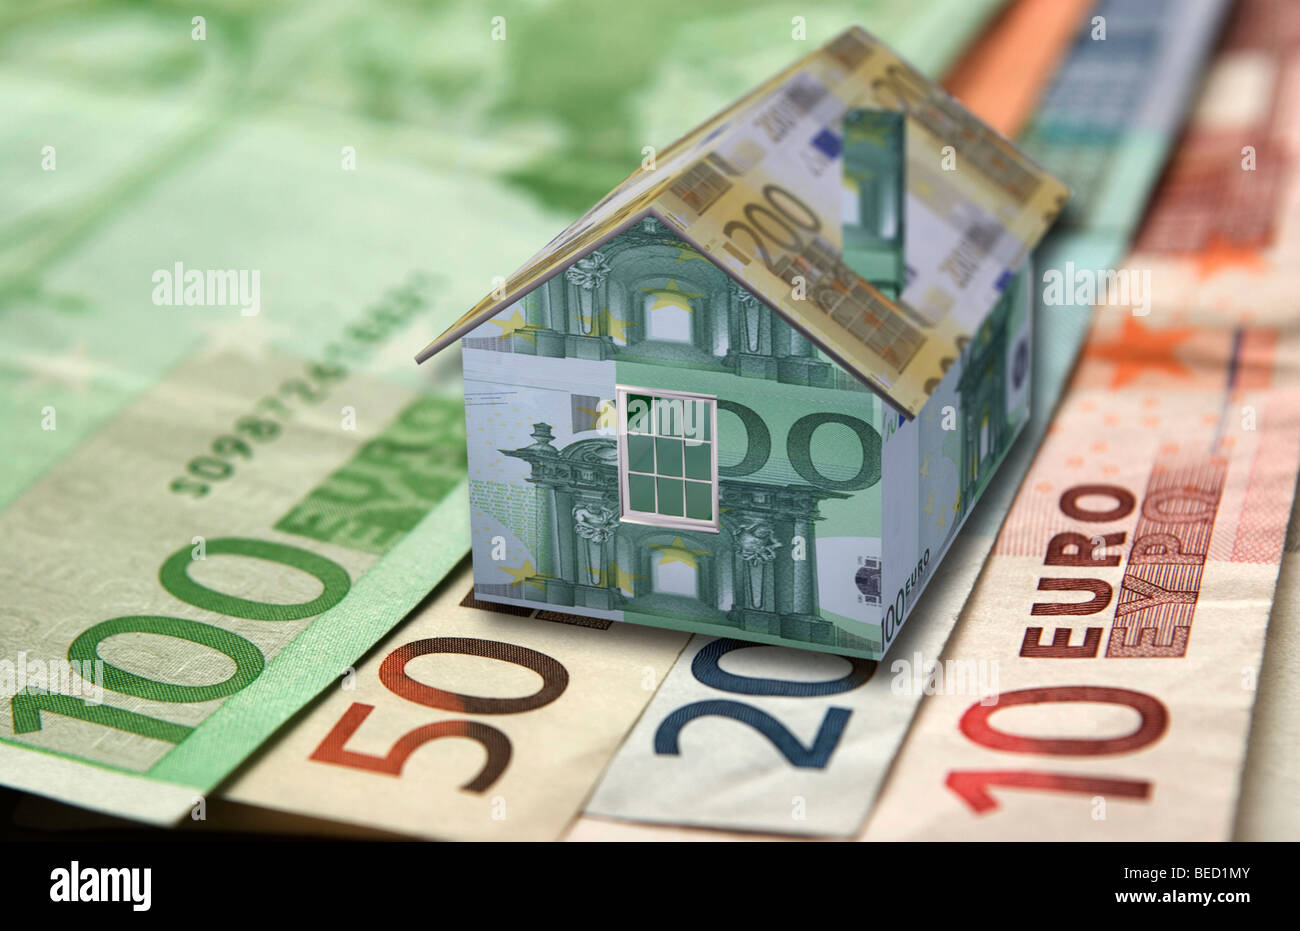 Miniature house and banknotes Stock Photo